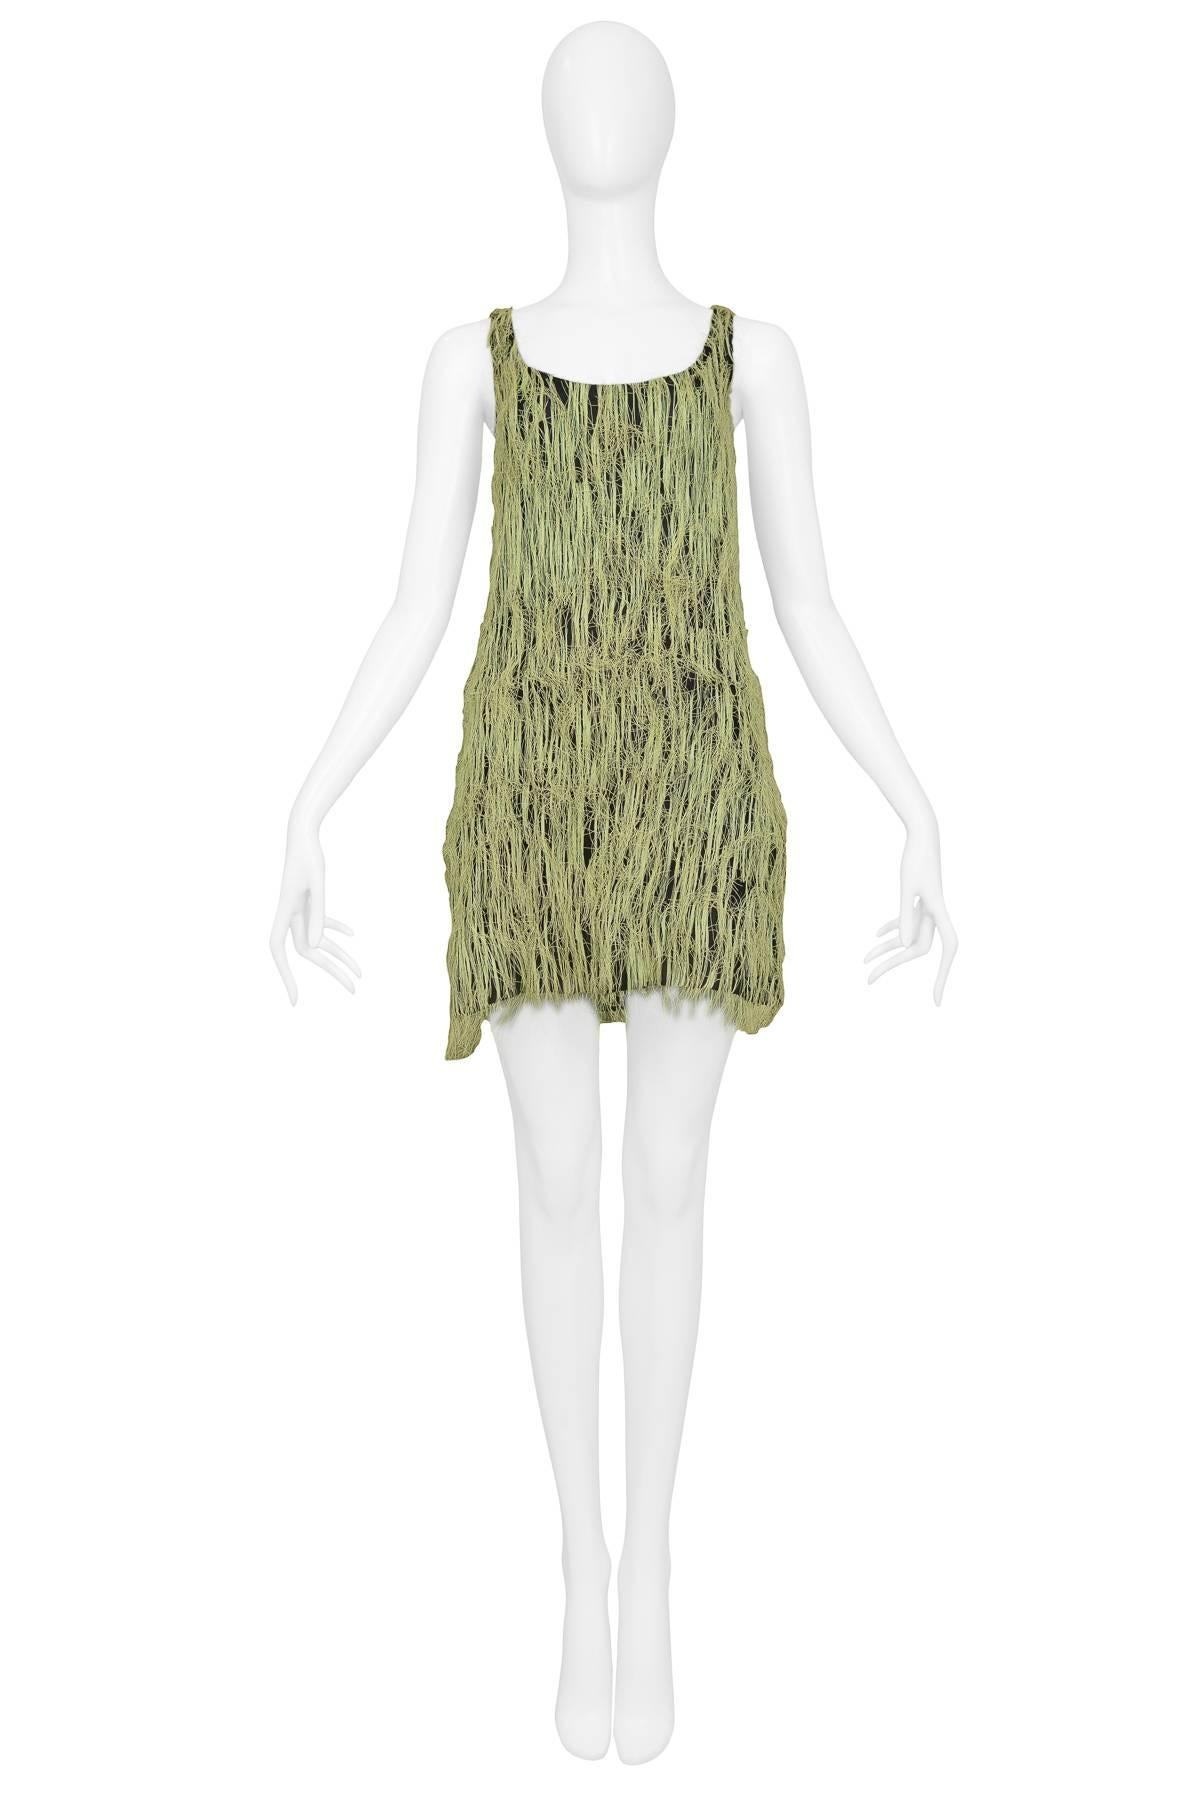 STEPHEN SPROUSE
Straw Dress 1988
Condition : Excellent Vintage Condition
Size : SMALL - Please inquire for measurements 
A very rare vintage Stephen Sprouse black sleeveless dress covered with yellow straw. Collection 1988. 